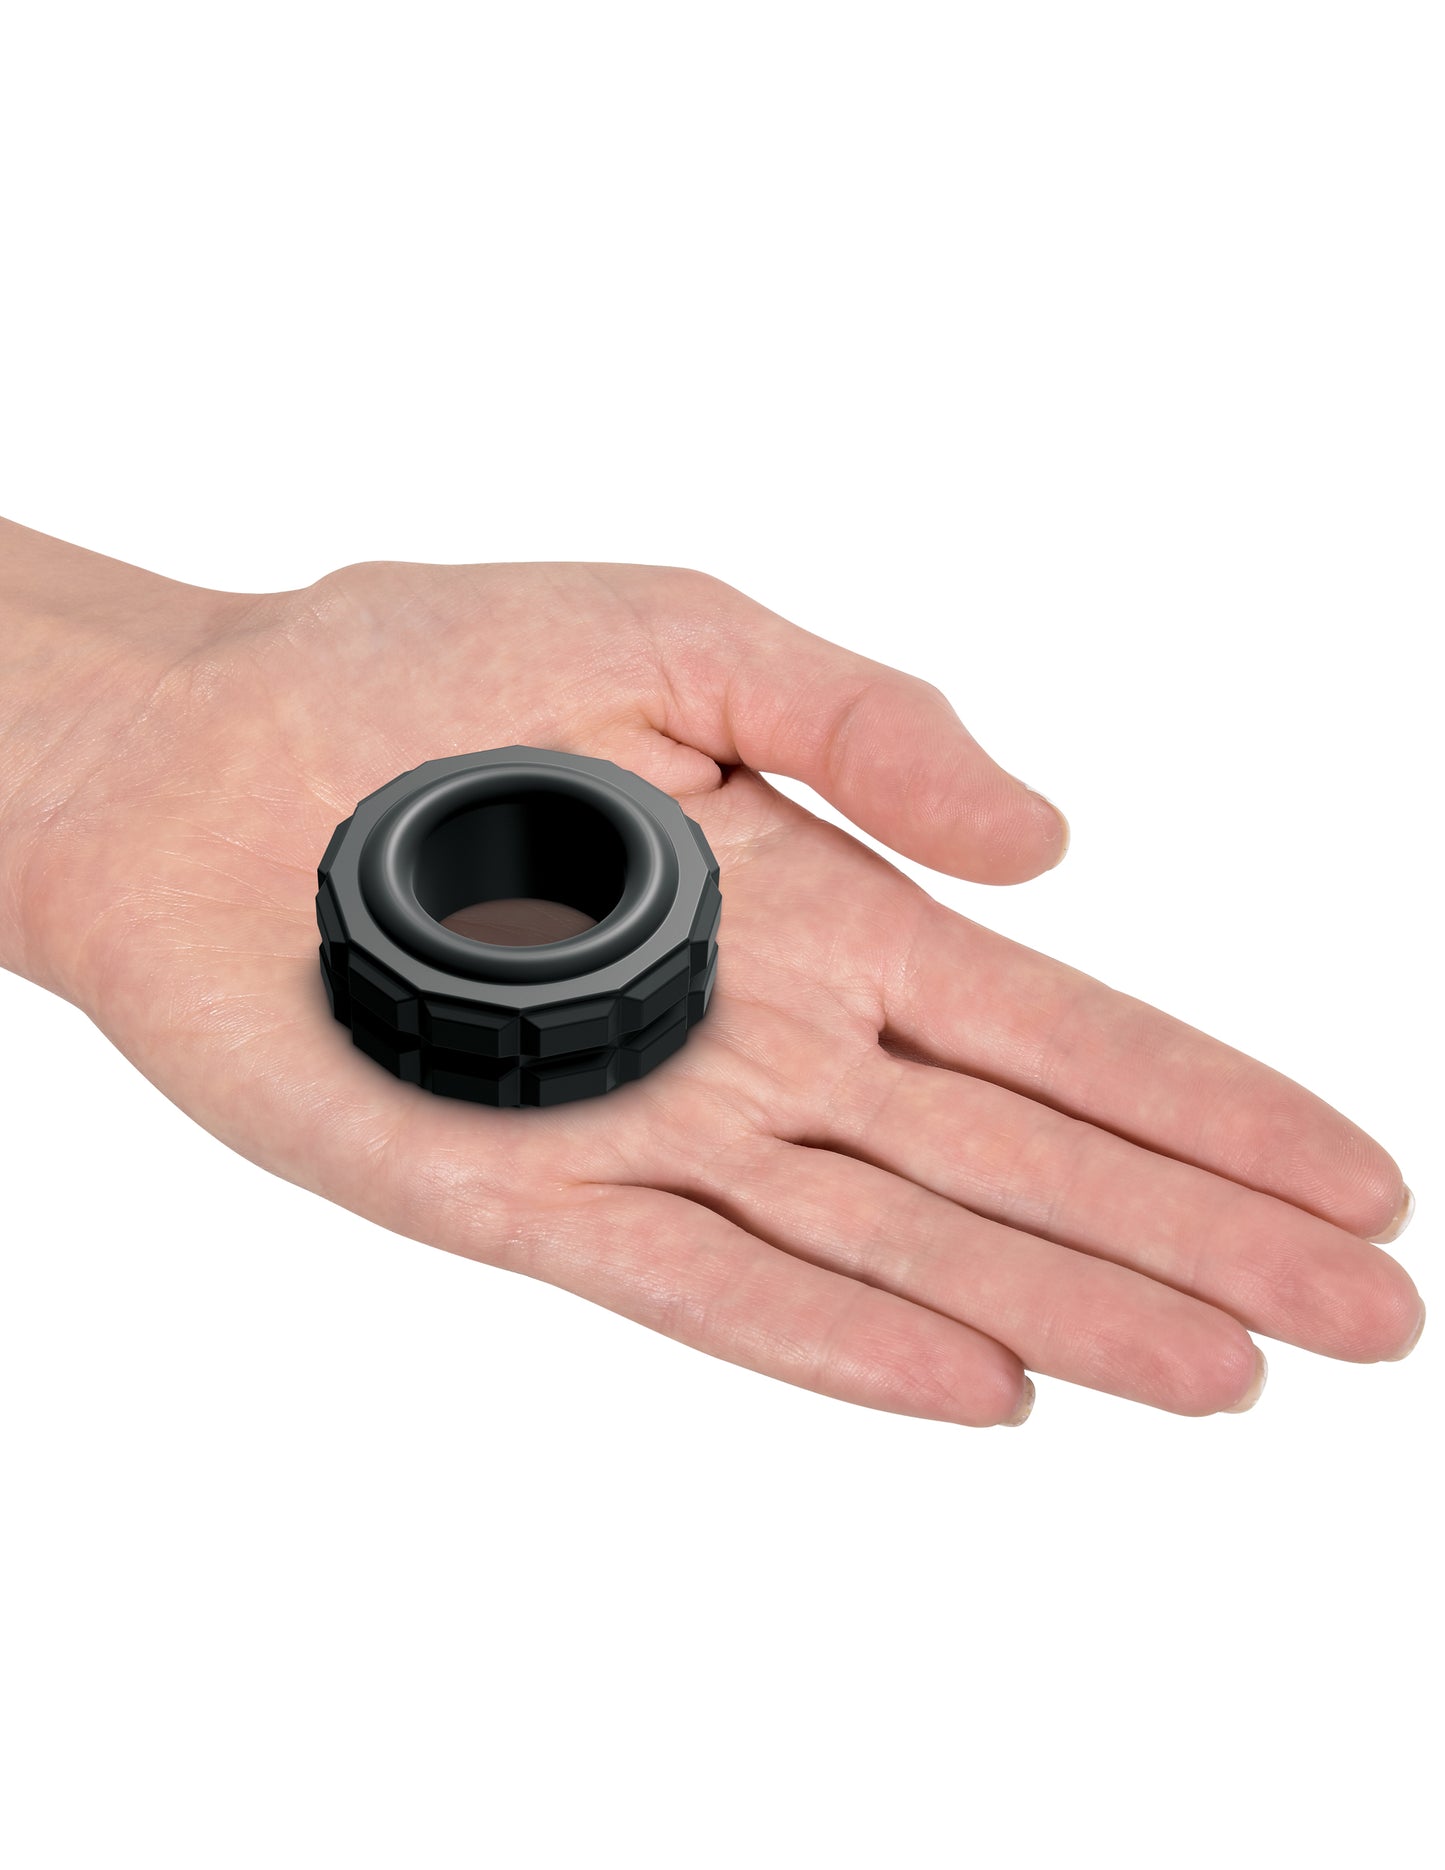 CONTROL by Sir Richard's High Performance Silicone C-Ring